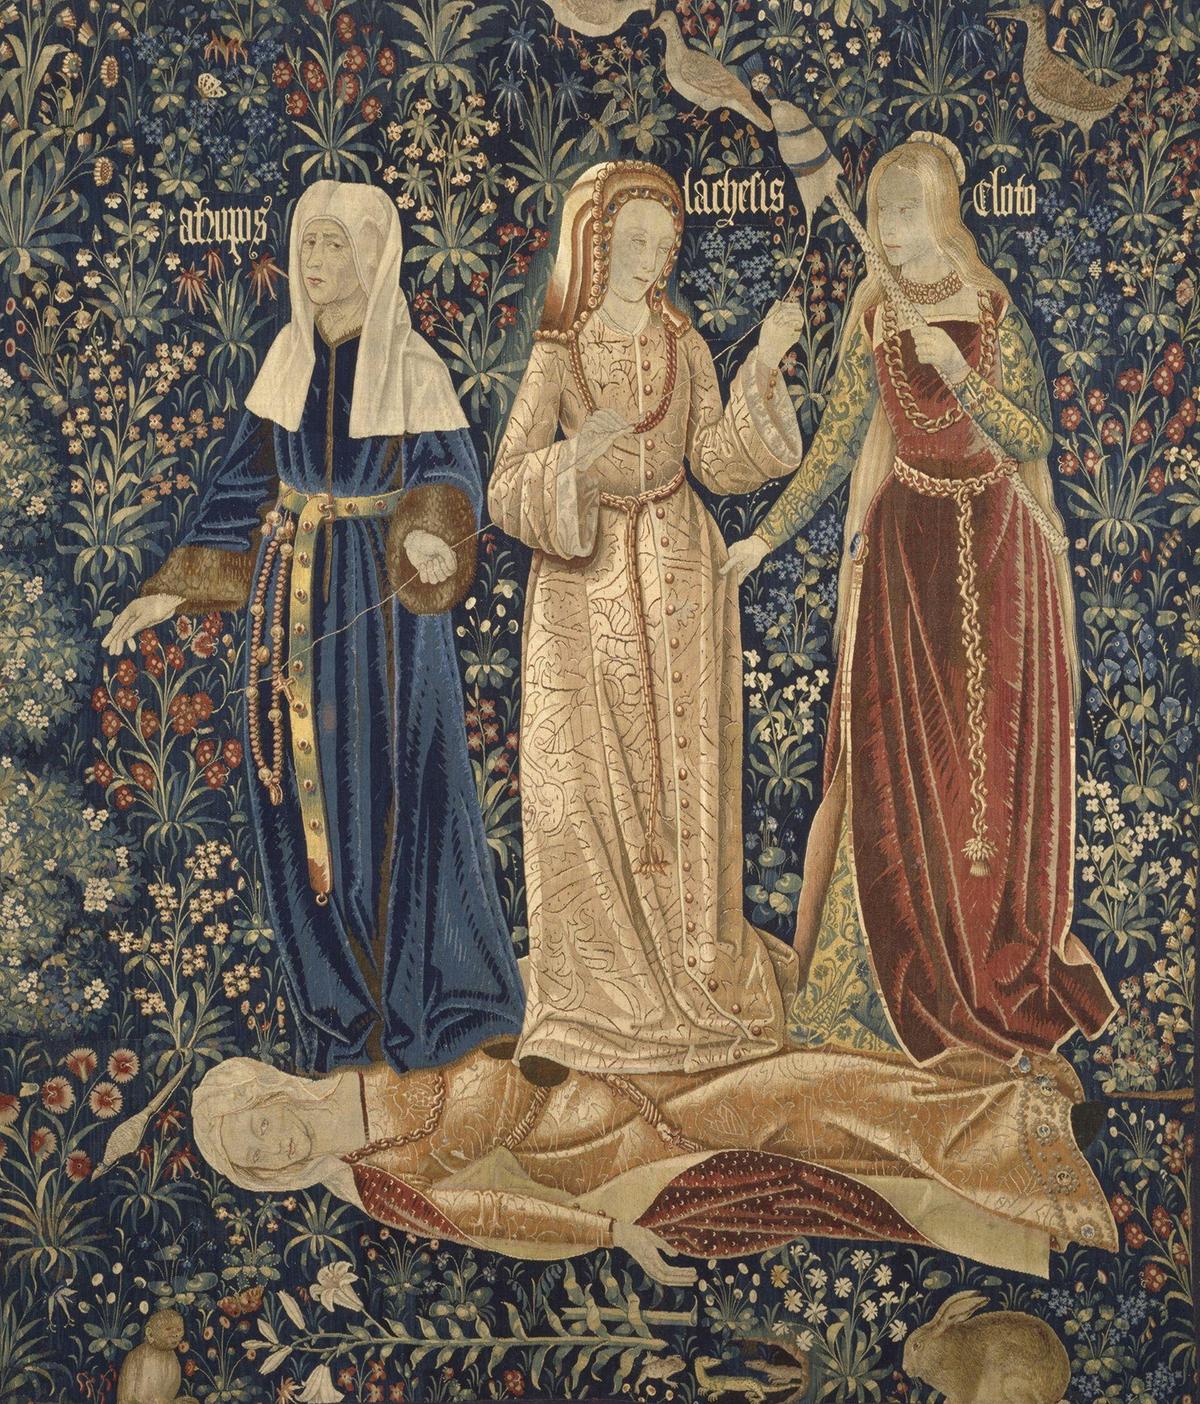 The three Fates (Clotho, Lachesis, and Atropos), who spin, draw out, and cut the thread of life, represent death in the tapestry "The Three Fates," early 16th century, by Flemish tapestry weavers. Victoria and Albert Museum, London. (Public Domain)